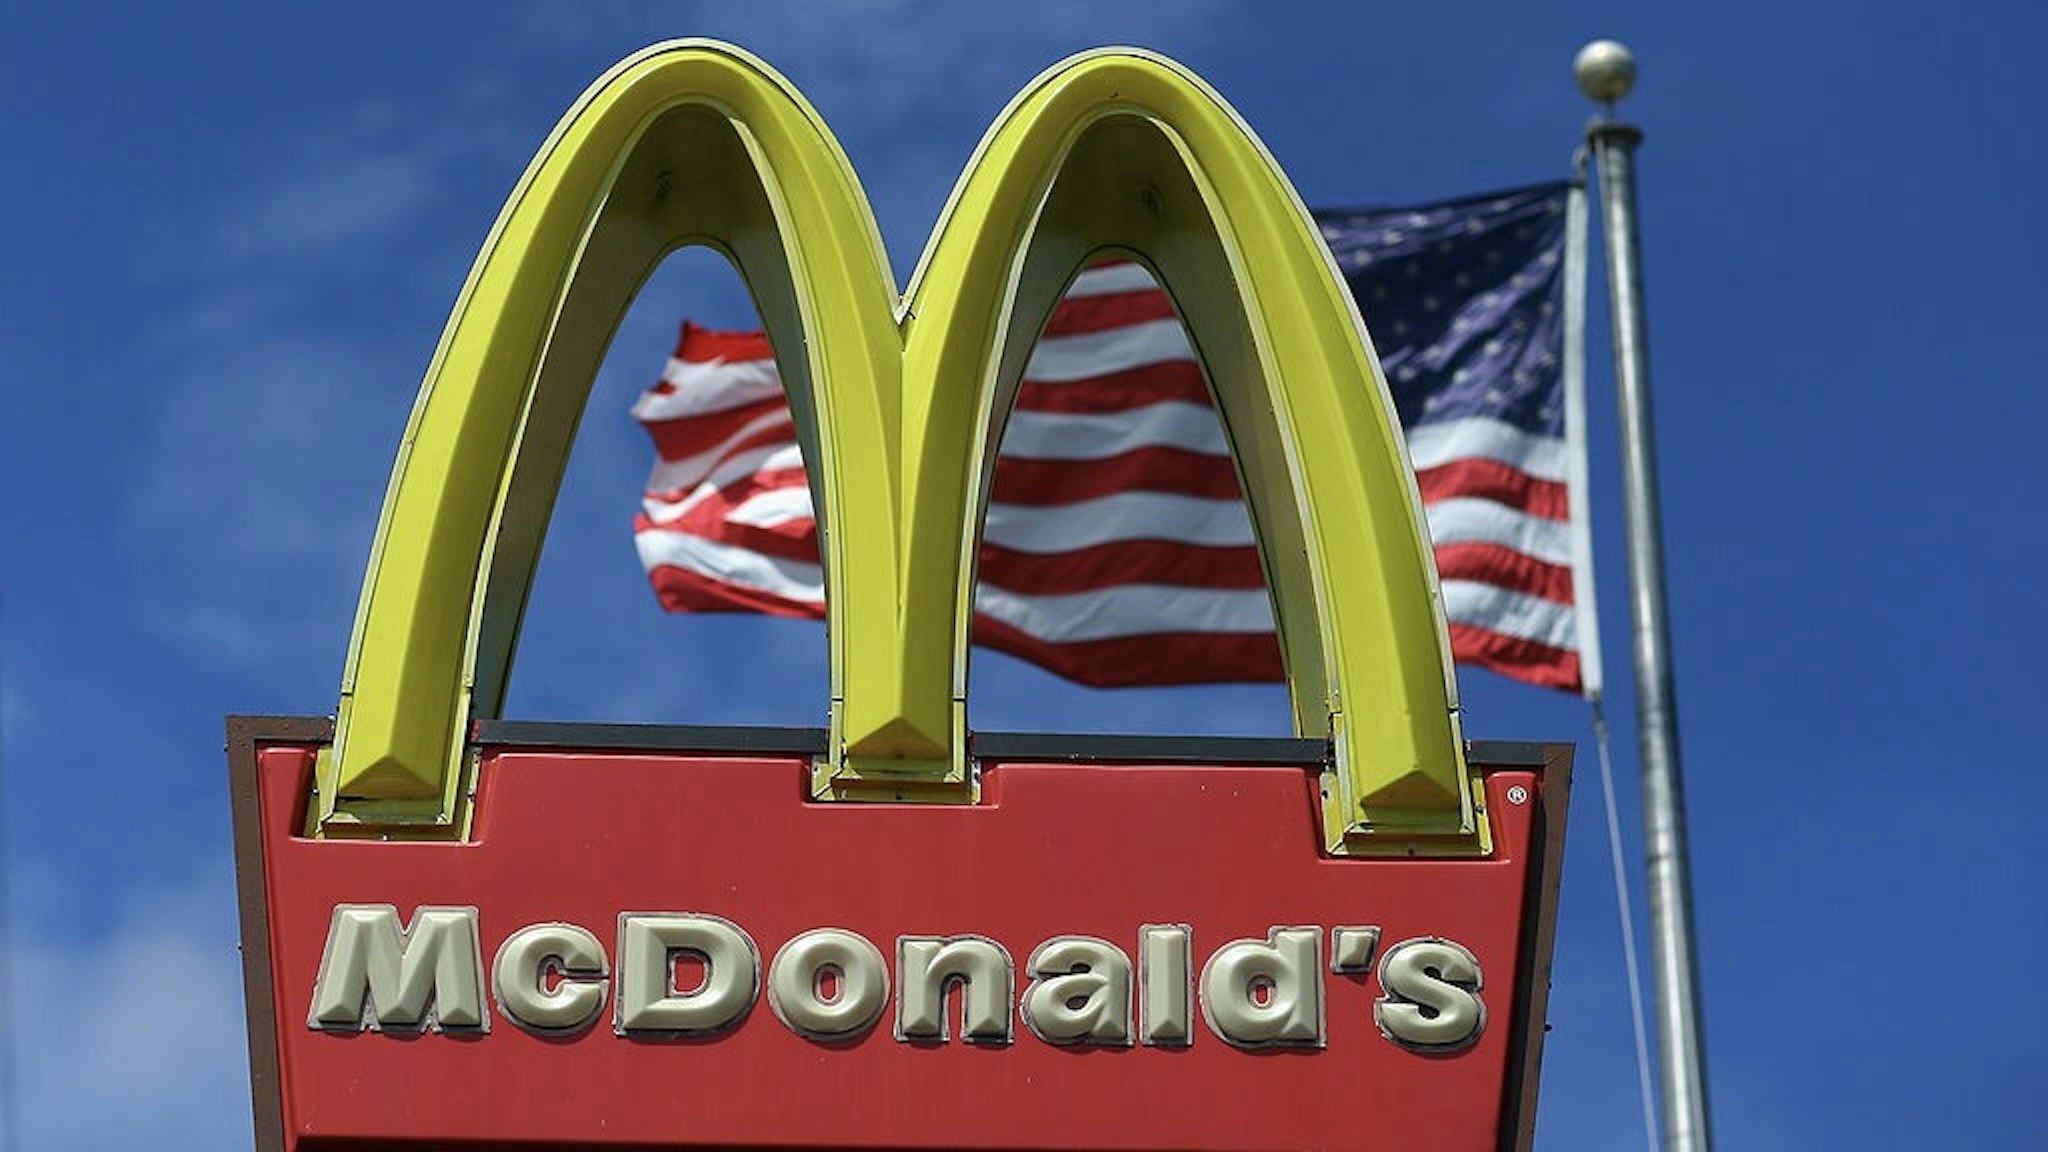 McDonalds Q2 Profit Drops 4.5 Percent On Stronger Dollar, Tougher Competition MIAMI, FL - JULY 23: A sign for a McDonald's restaurant sits in front of an American Flag July 23, 2012 in Miami, Florida. The company announced that 2nd quarter profit dropped 4.5 percent. (Photo by Joe Raedle/Getty Images)